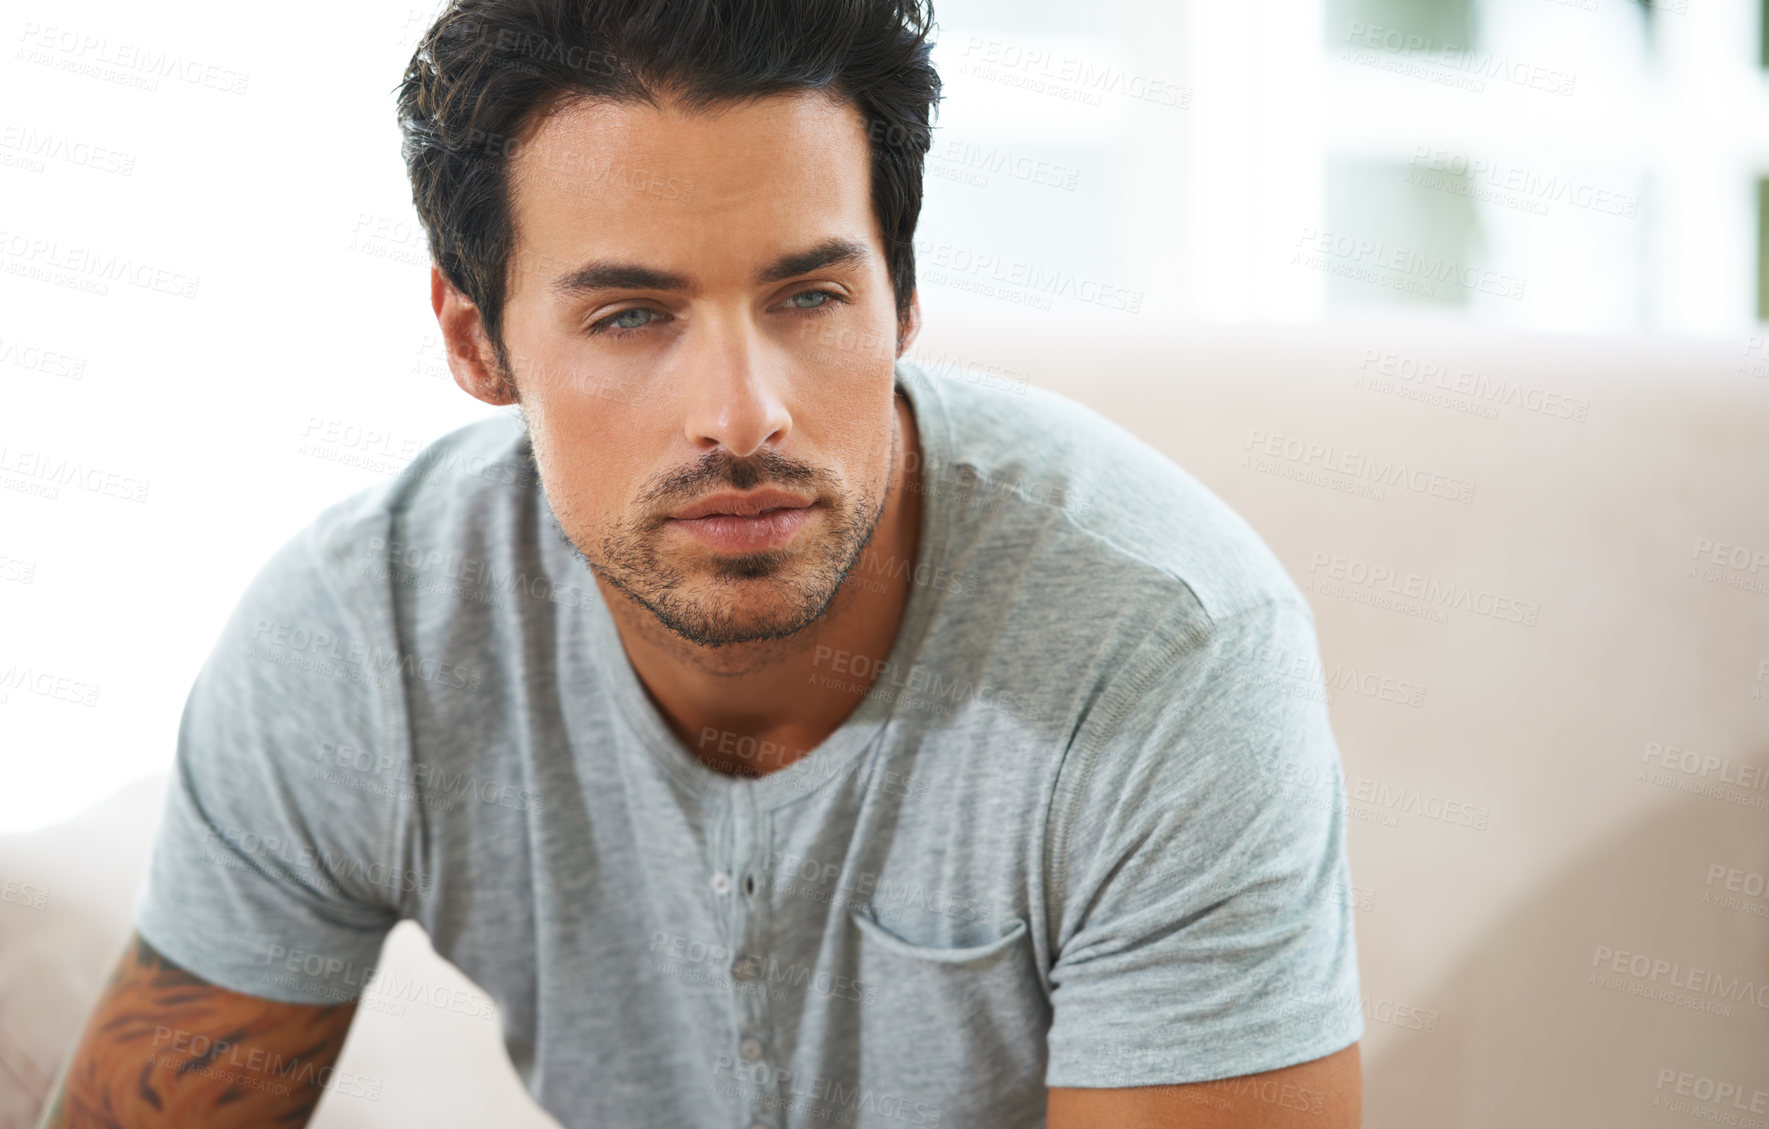 Buy stock photo Cropped shot of a handsome young man deep in thought